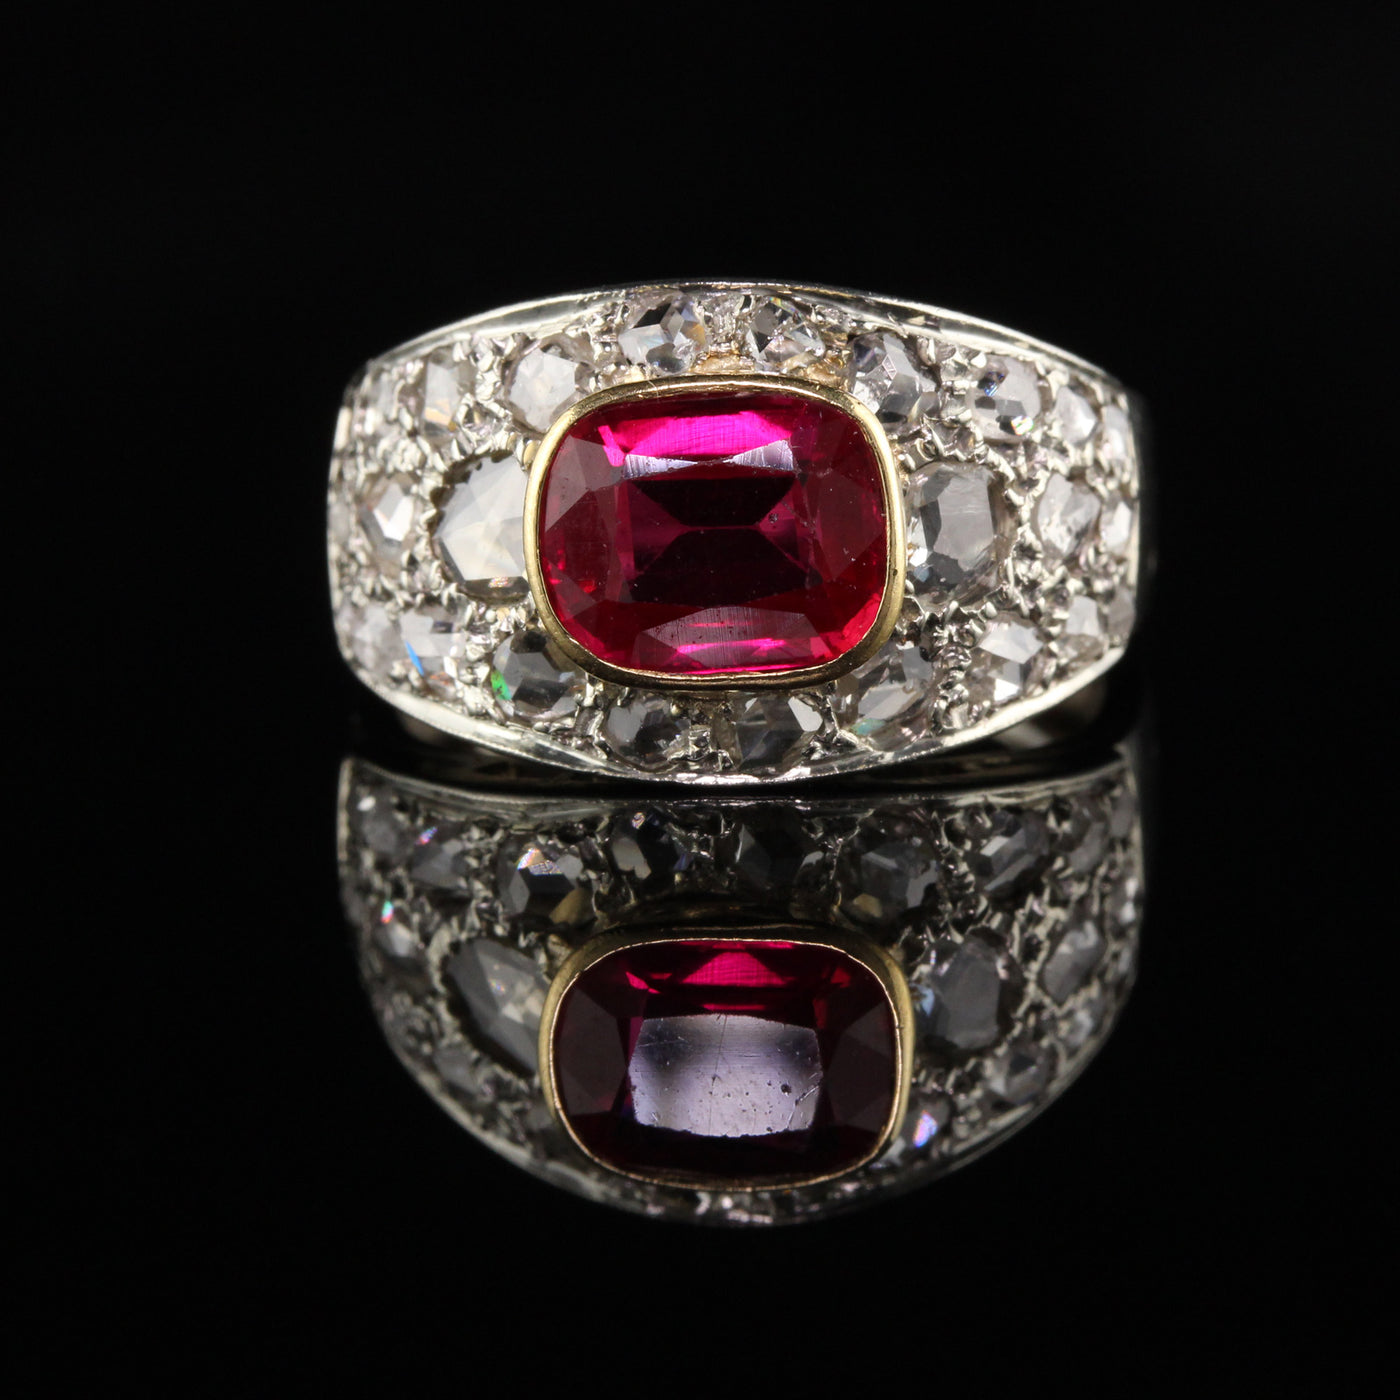 Antique Art Deco 18K White Gold Rose Cut Diamond and Ruby Ring